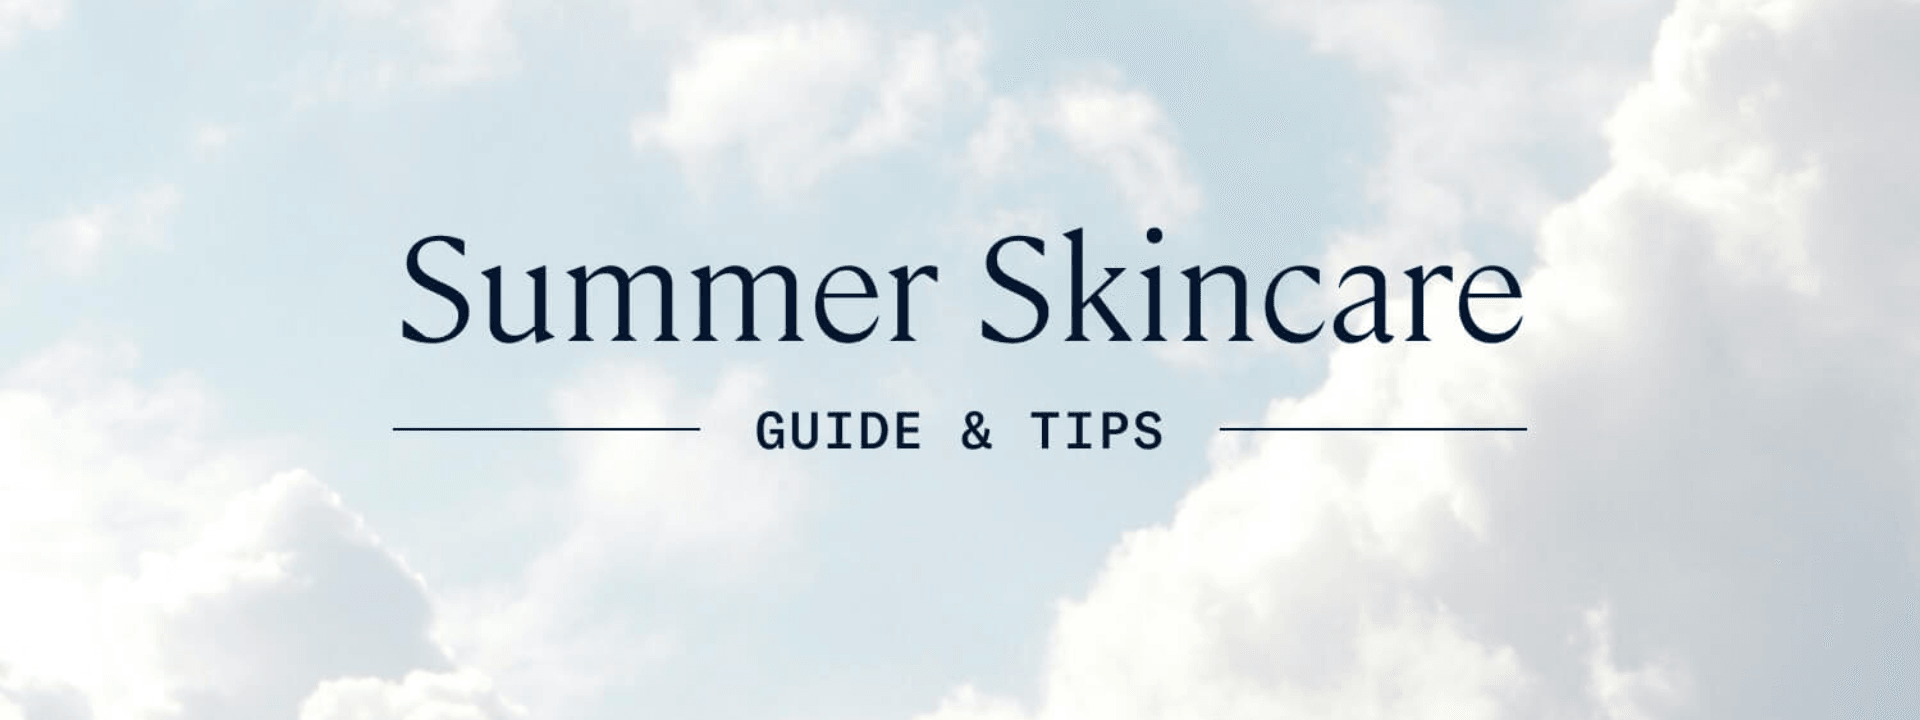 10 Summer Skincare Tips Dermatologists Swear By - 1st Mini Skincare Fridges With LED Mirror | COOSEON®